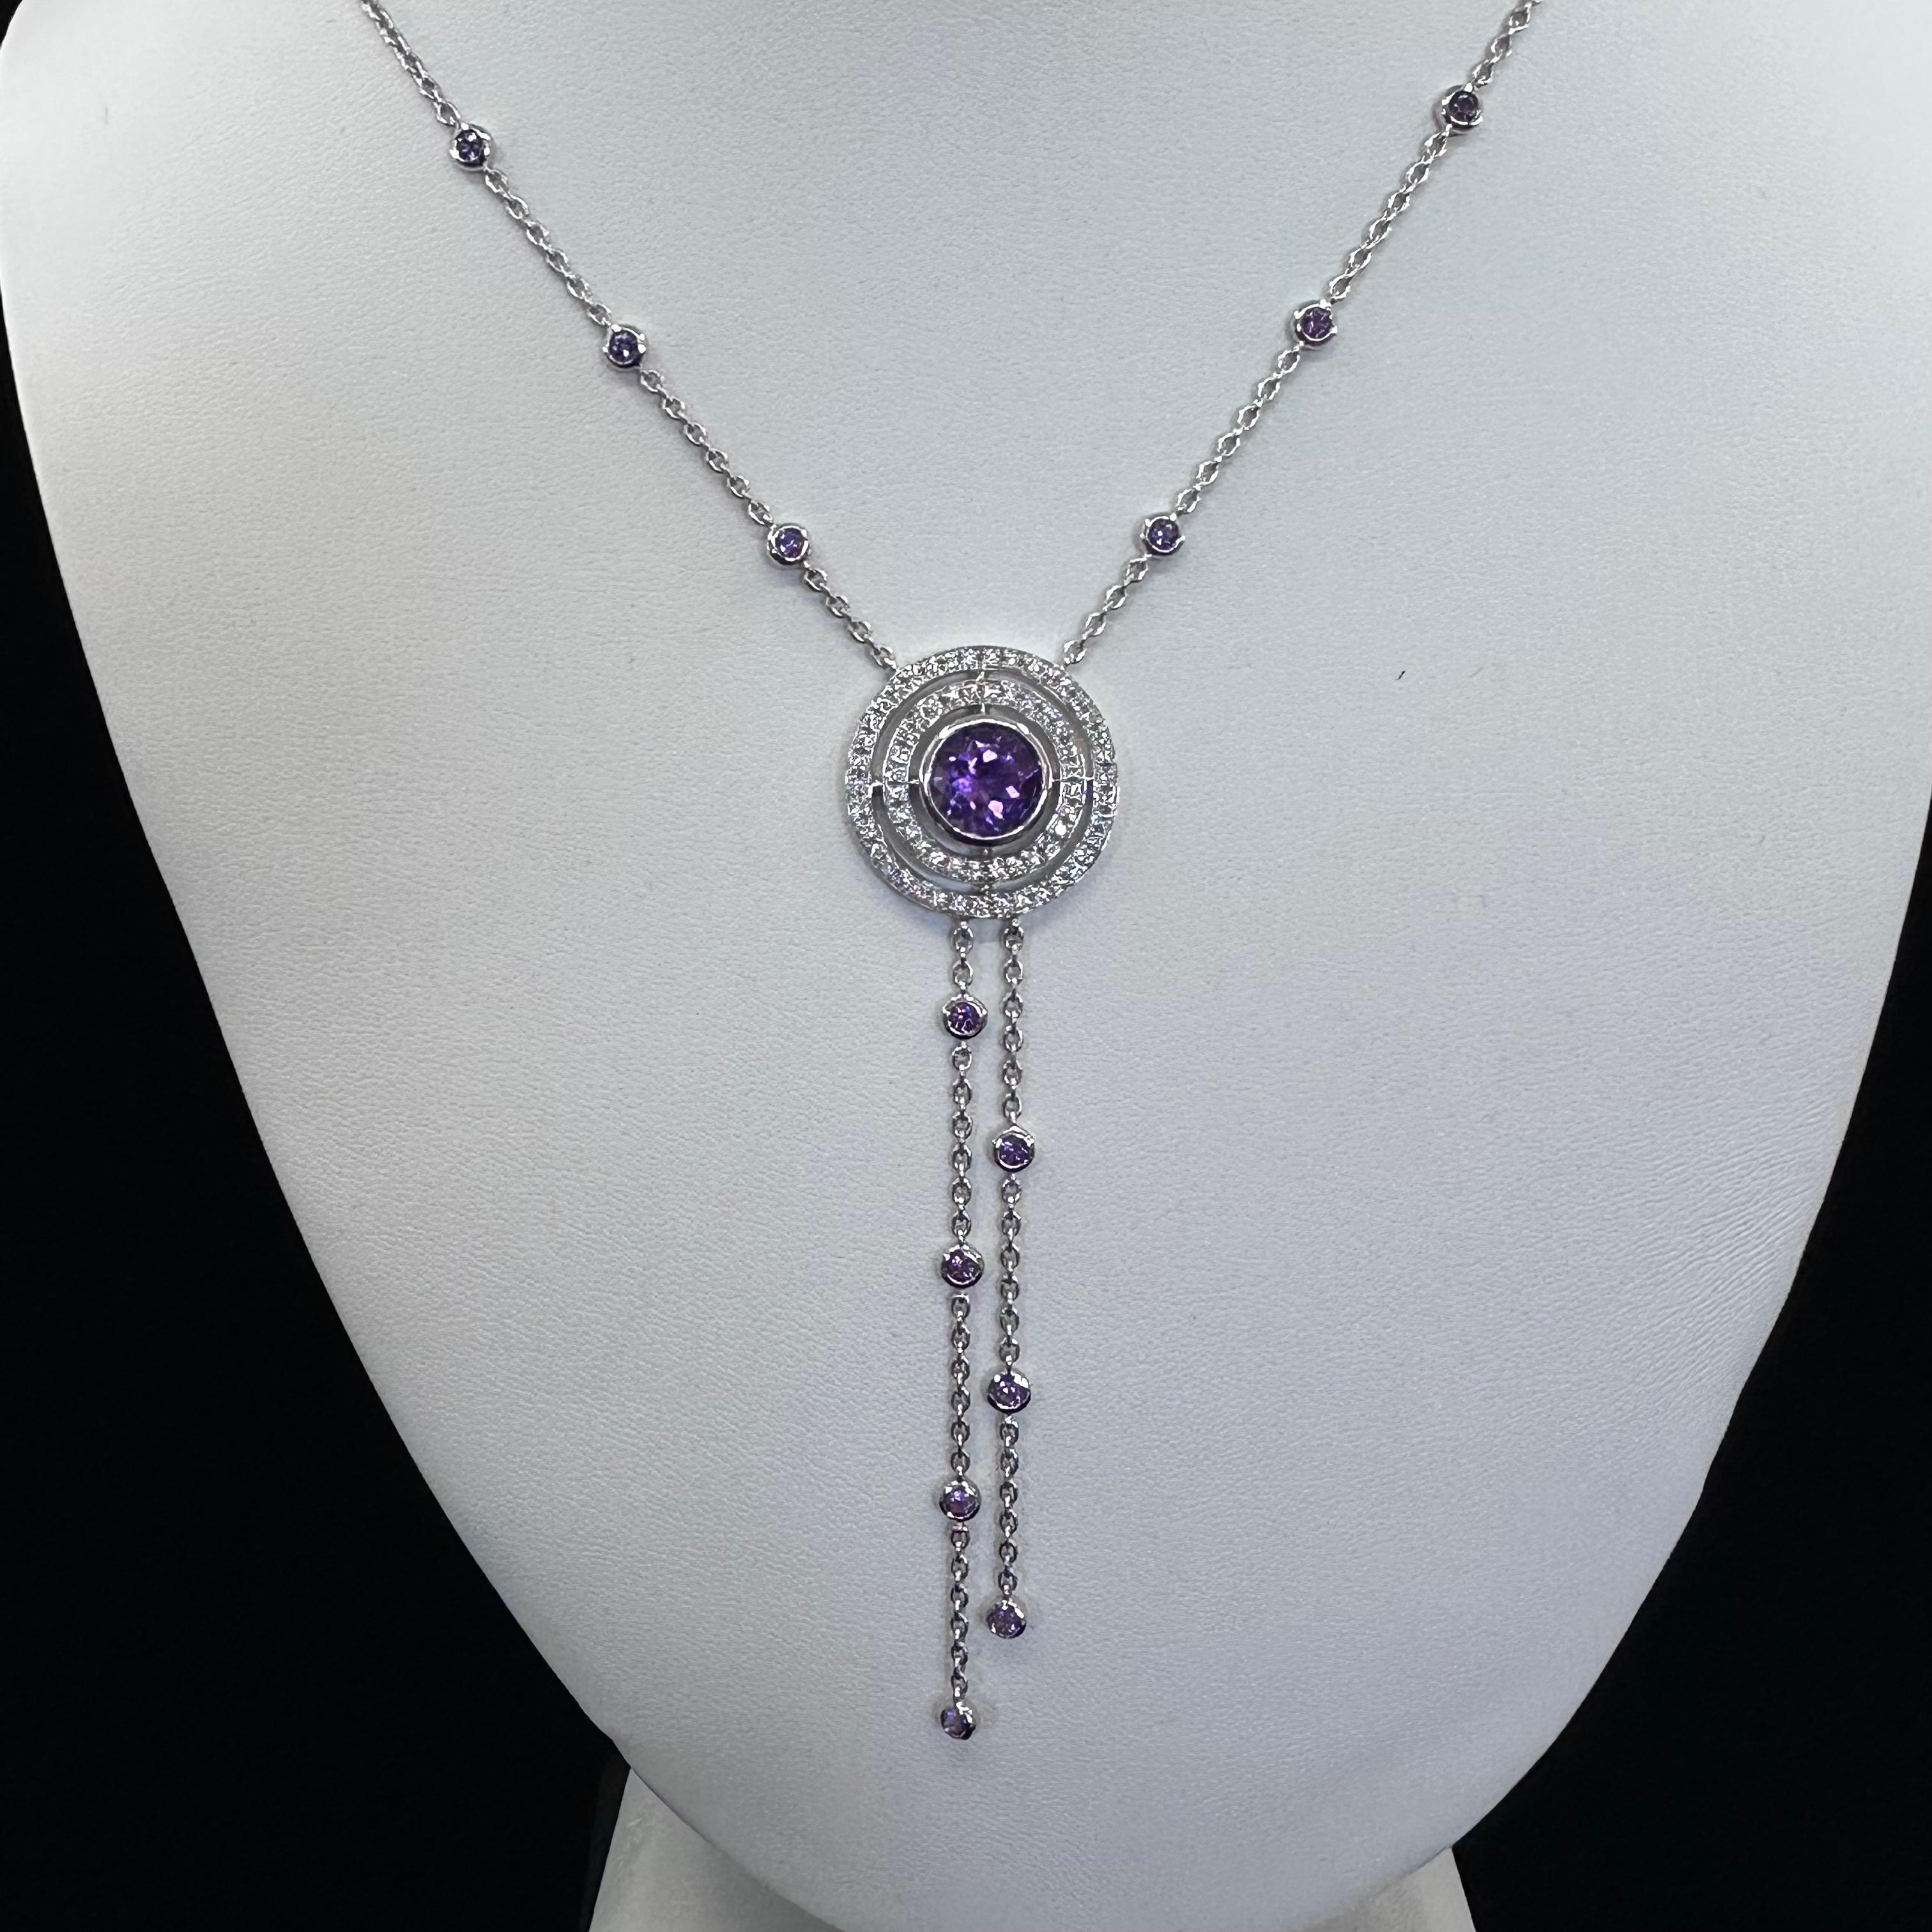 Theo Fennell
Amethyst Diamond Necklace
18k White Gold 12.57 g
One Round Amethyst 8mm x 5mm Est Weight: 3.50 cts
Numerous round diamonds in two circular halo Pave Setttings
Chain Length 17 Inches with a 3 Inch Drop
The amethyst pendant in the center